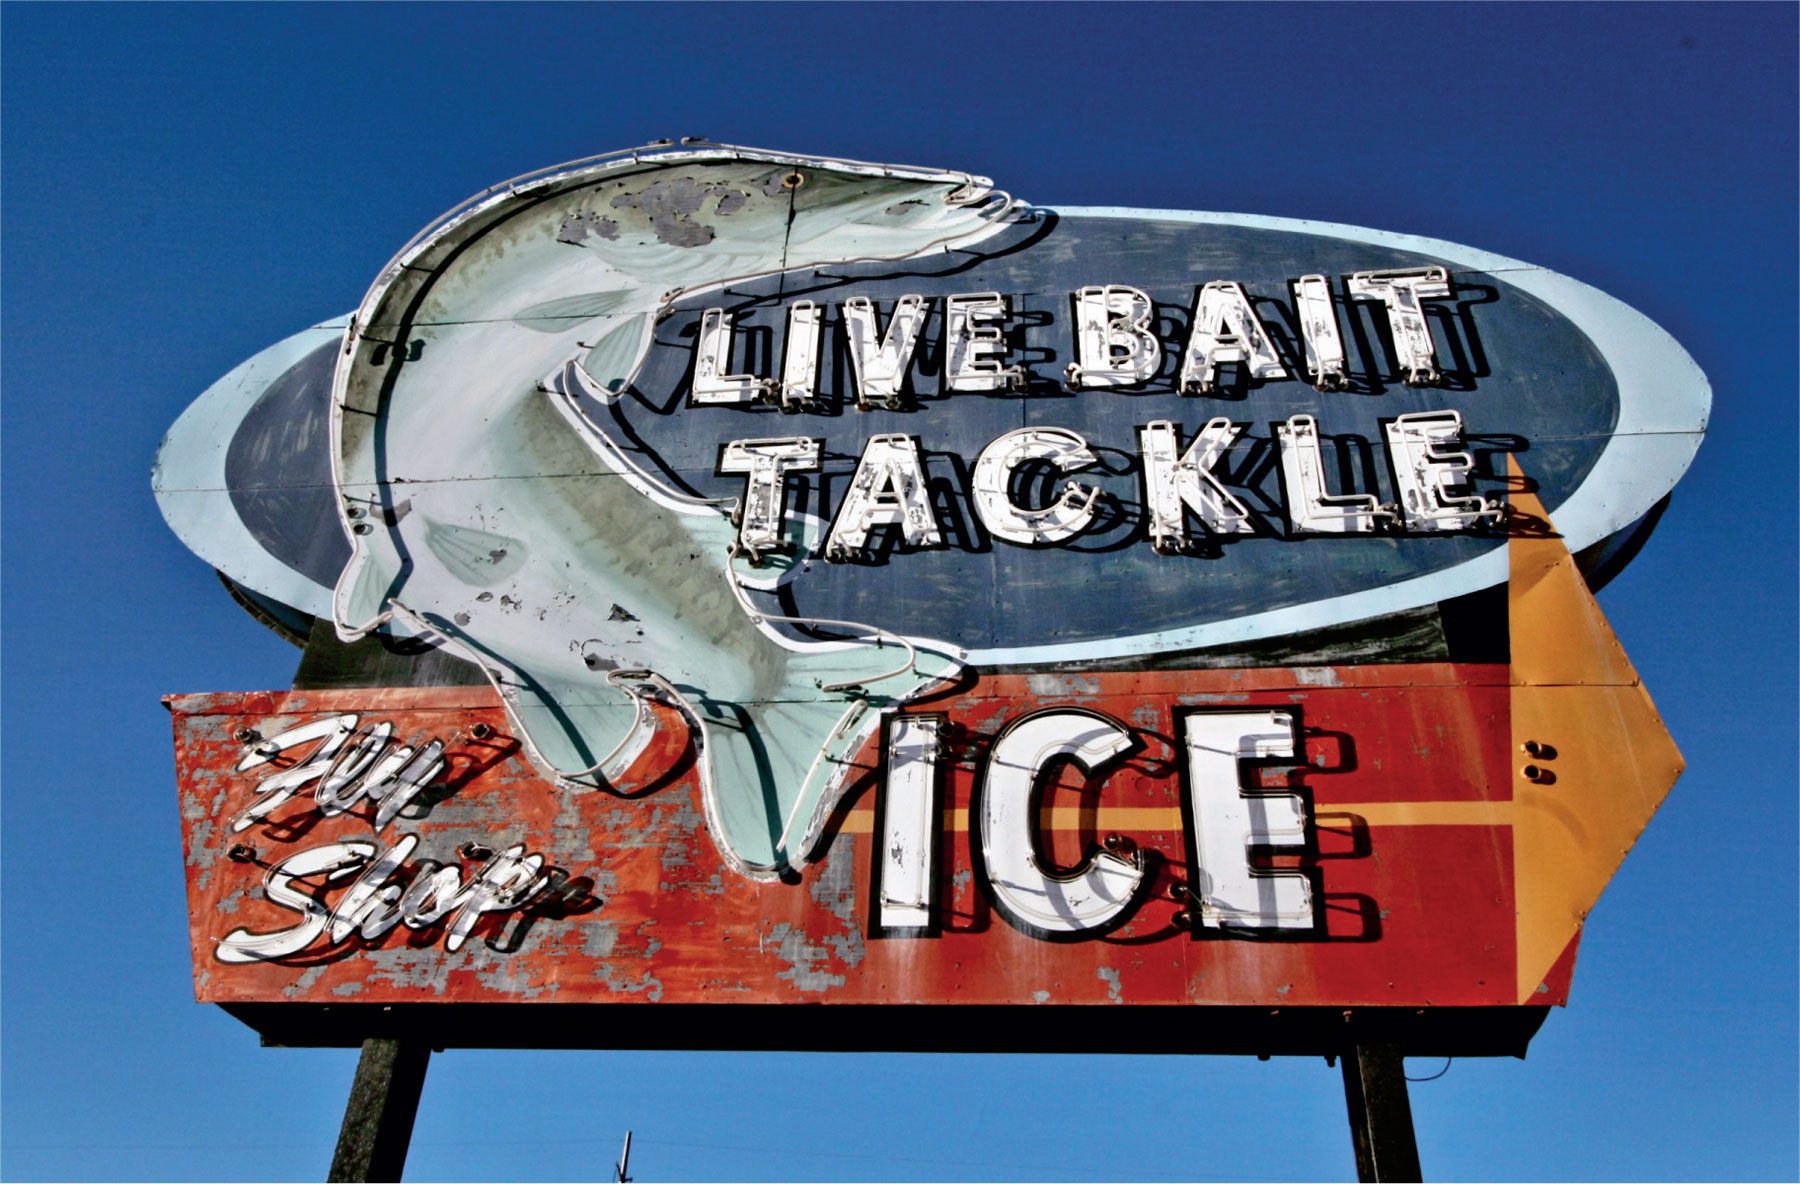 Neon Live Bait and Tackle sign, Hayward, Wisconsin